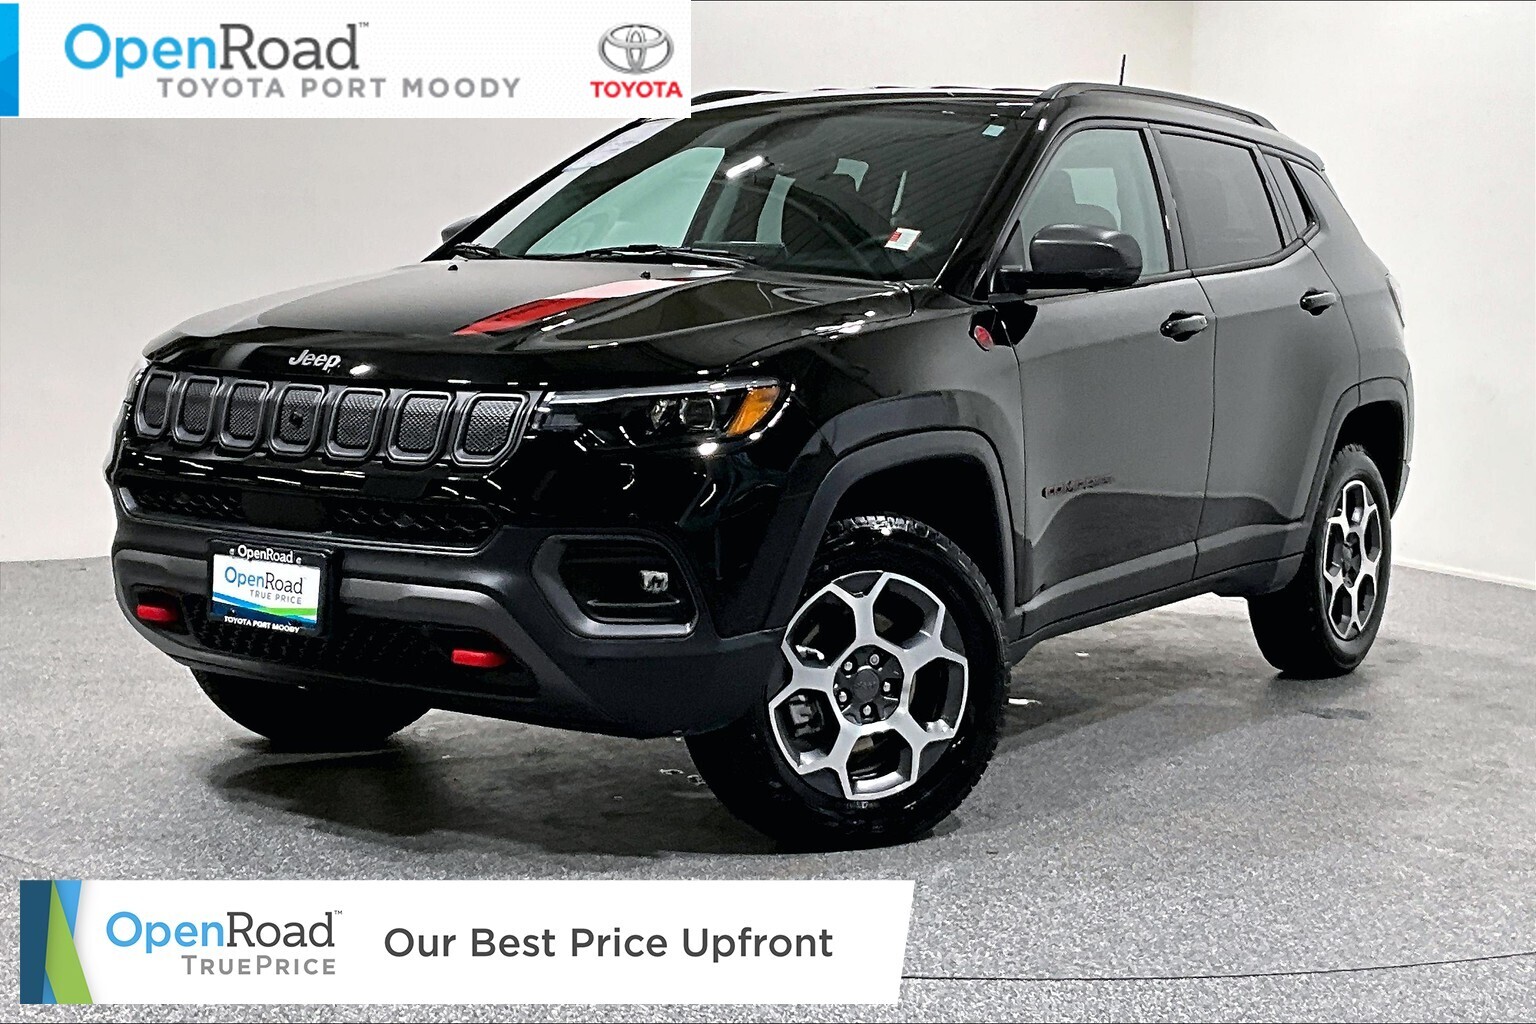 2022 Jeep Compass 4x4 Trailhawk |OpenRoad True Price |Local |One Own